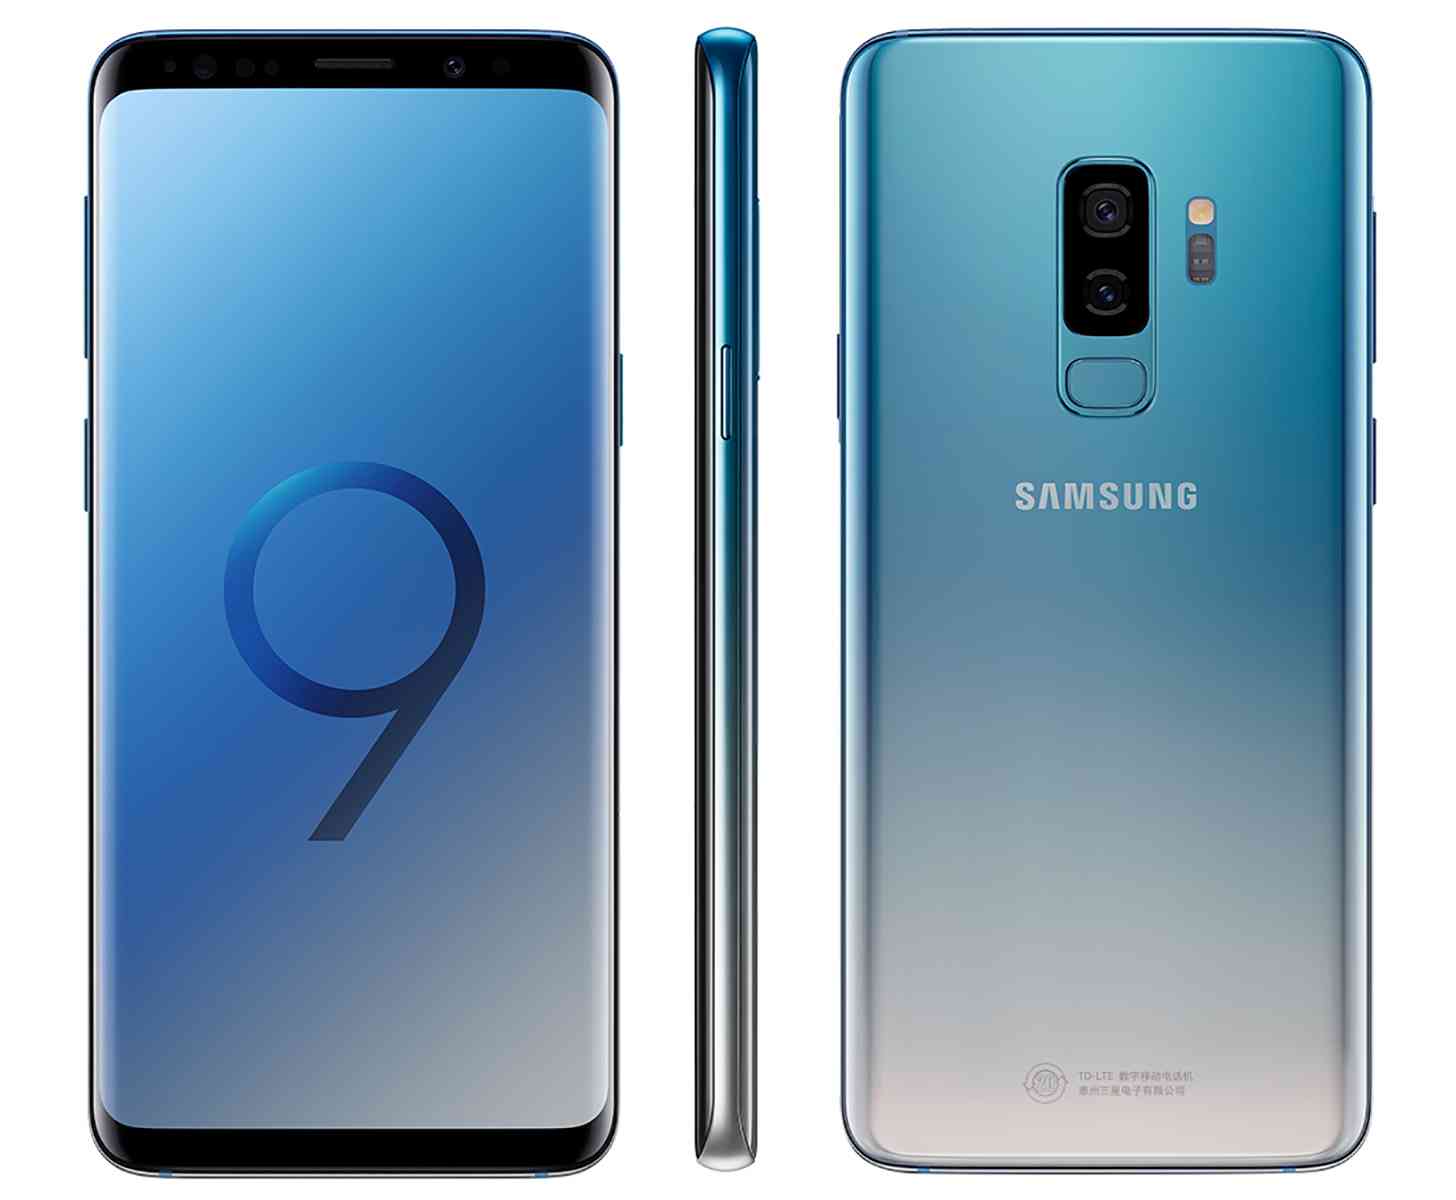 Ice Blue Samsung Galaxy S9 Plus official